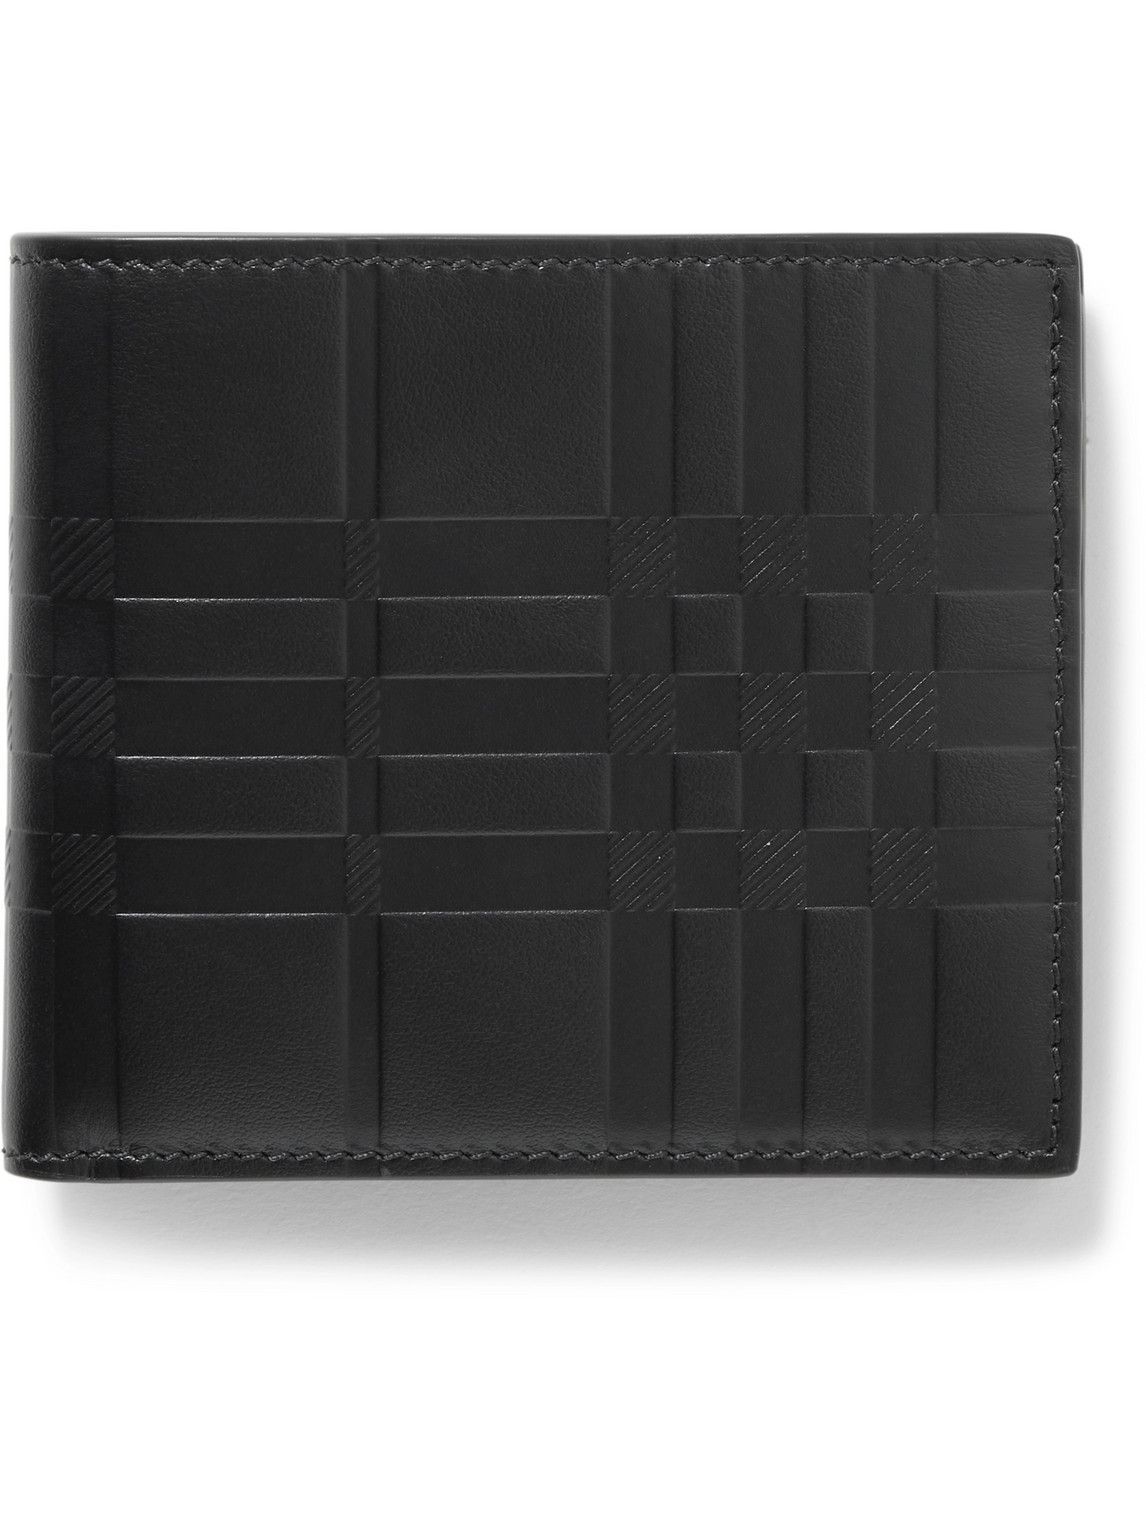 Burberry - Embossed Leather Billfold Wallet